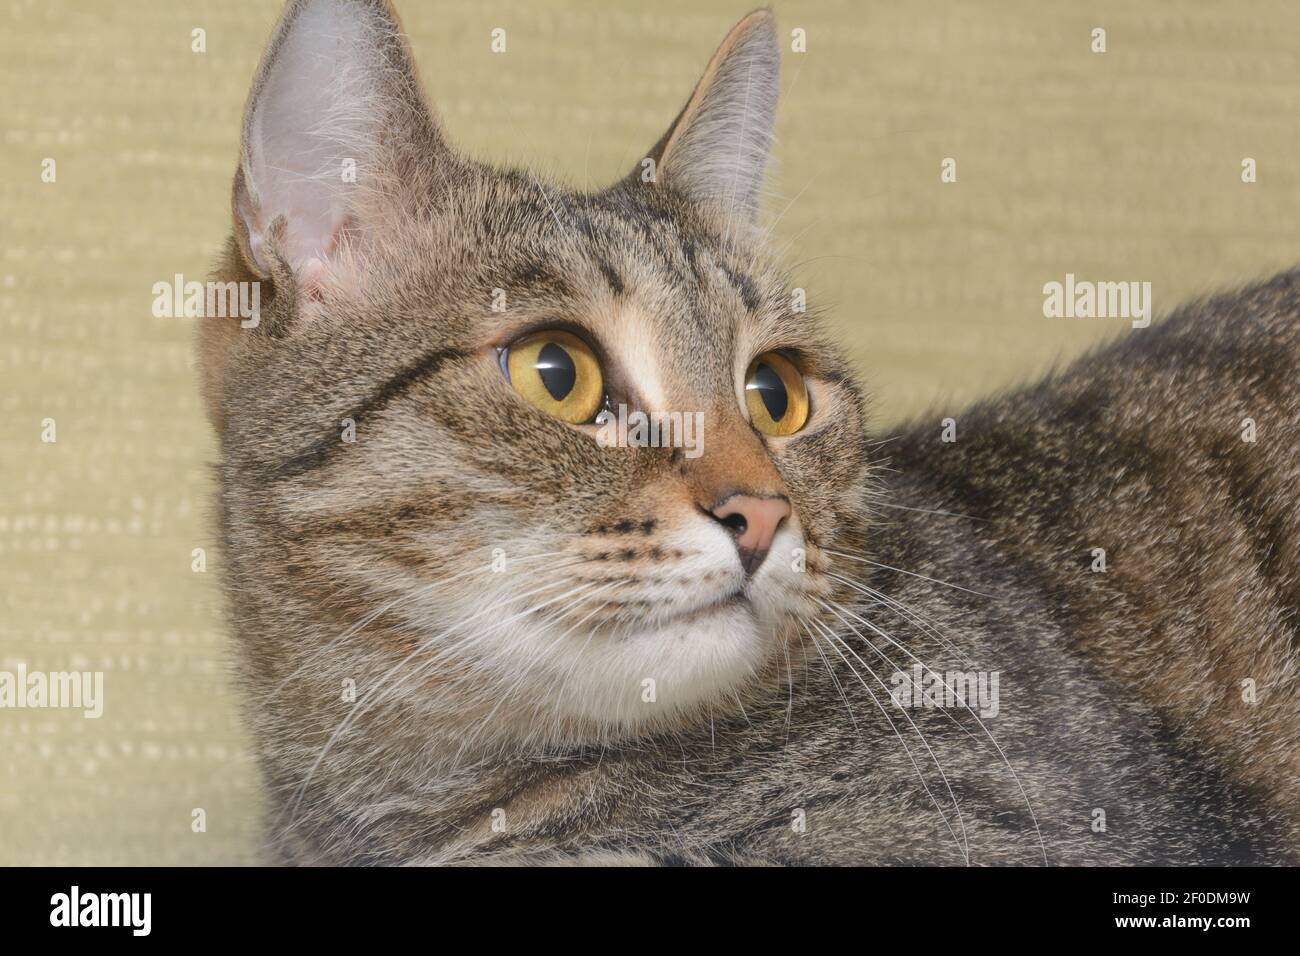 Portrait of large tabby cat with green eyes, close-up. Stock Photo